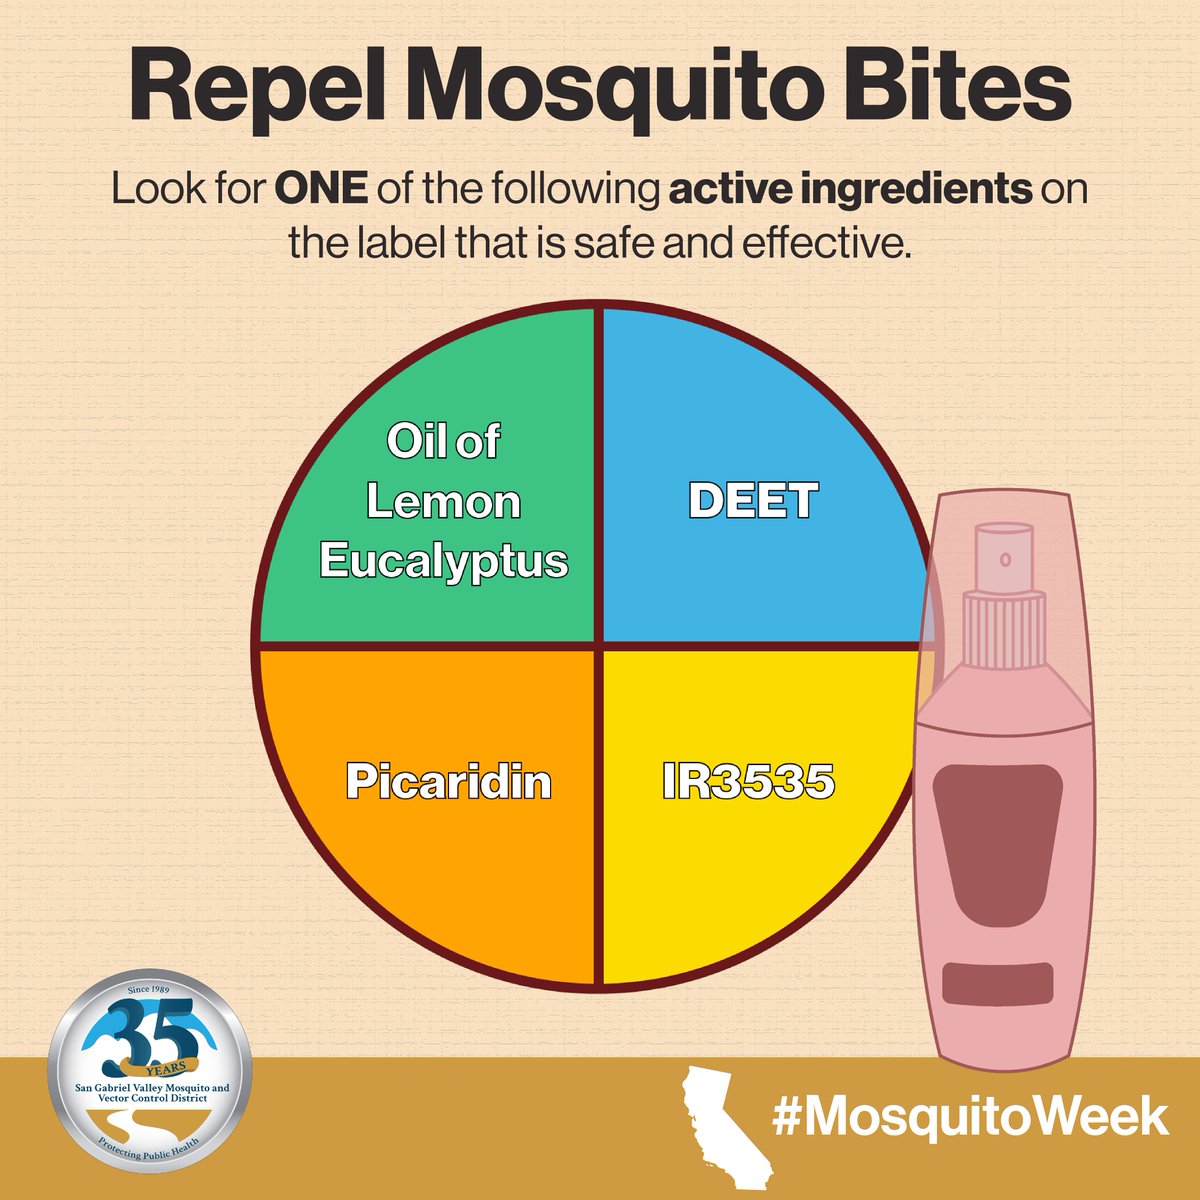 🌿 Don't let mosquitoes crash your outdoor fun! Keep them at bay with mosquito repellent that works. Whether you're hiking, camping, or just enjoying your backyard, stay protected and bite-free. #MosquitoWeek #SGVmosquito35th MosquitoAwareness.org